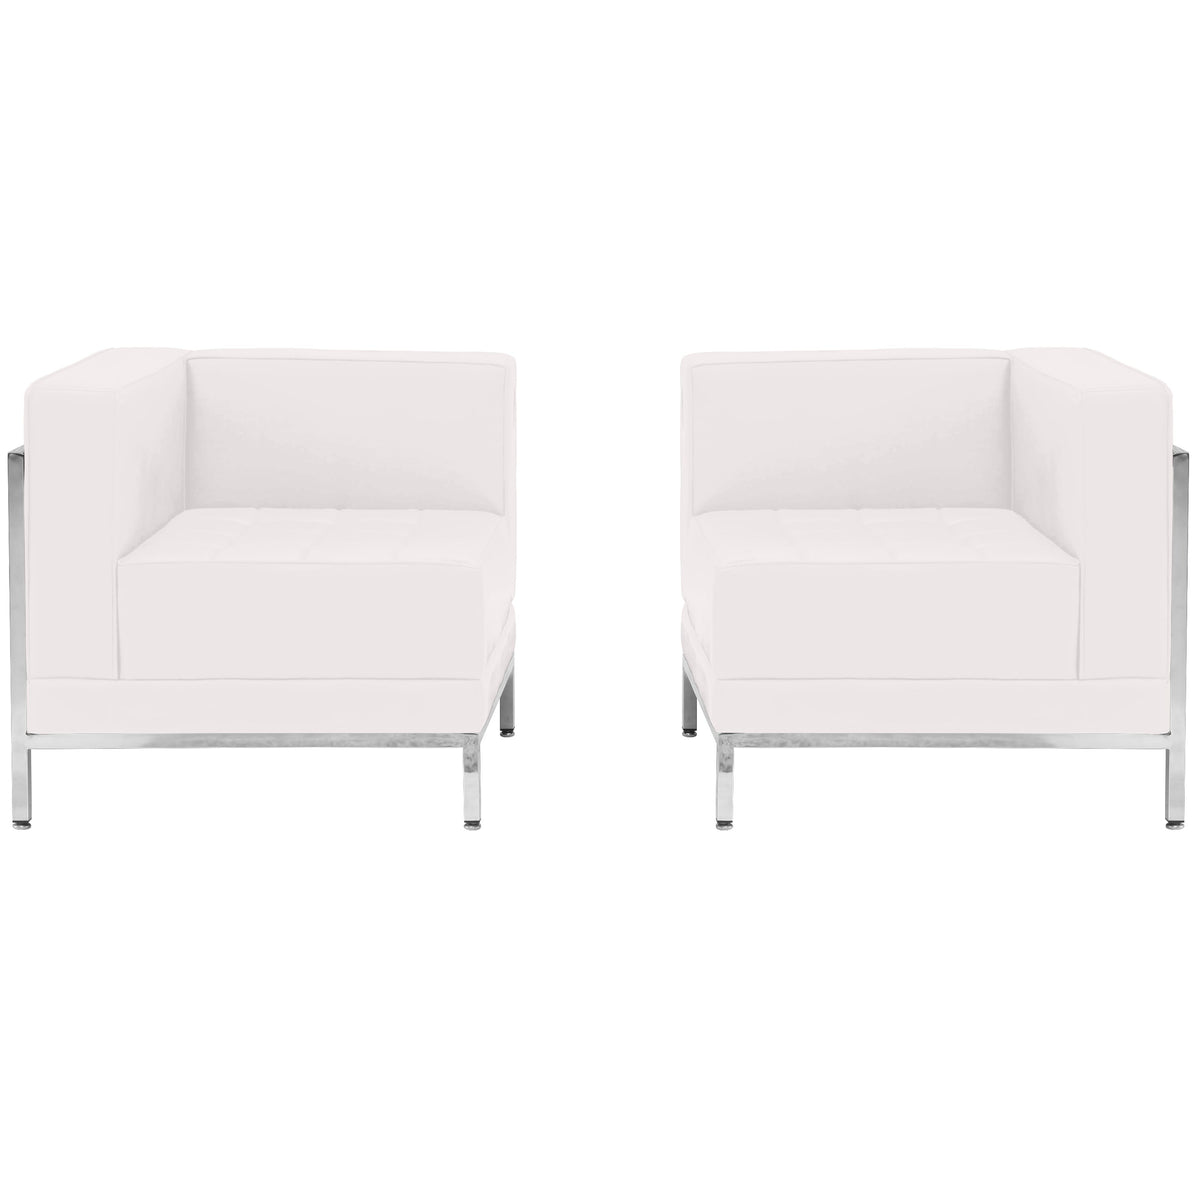 Melrose White |#| White LeatherSoft 2 Piece Modular Corner Chair Set with Taut Back and Seat